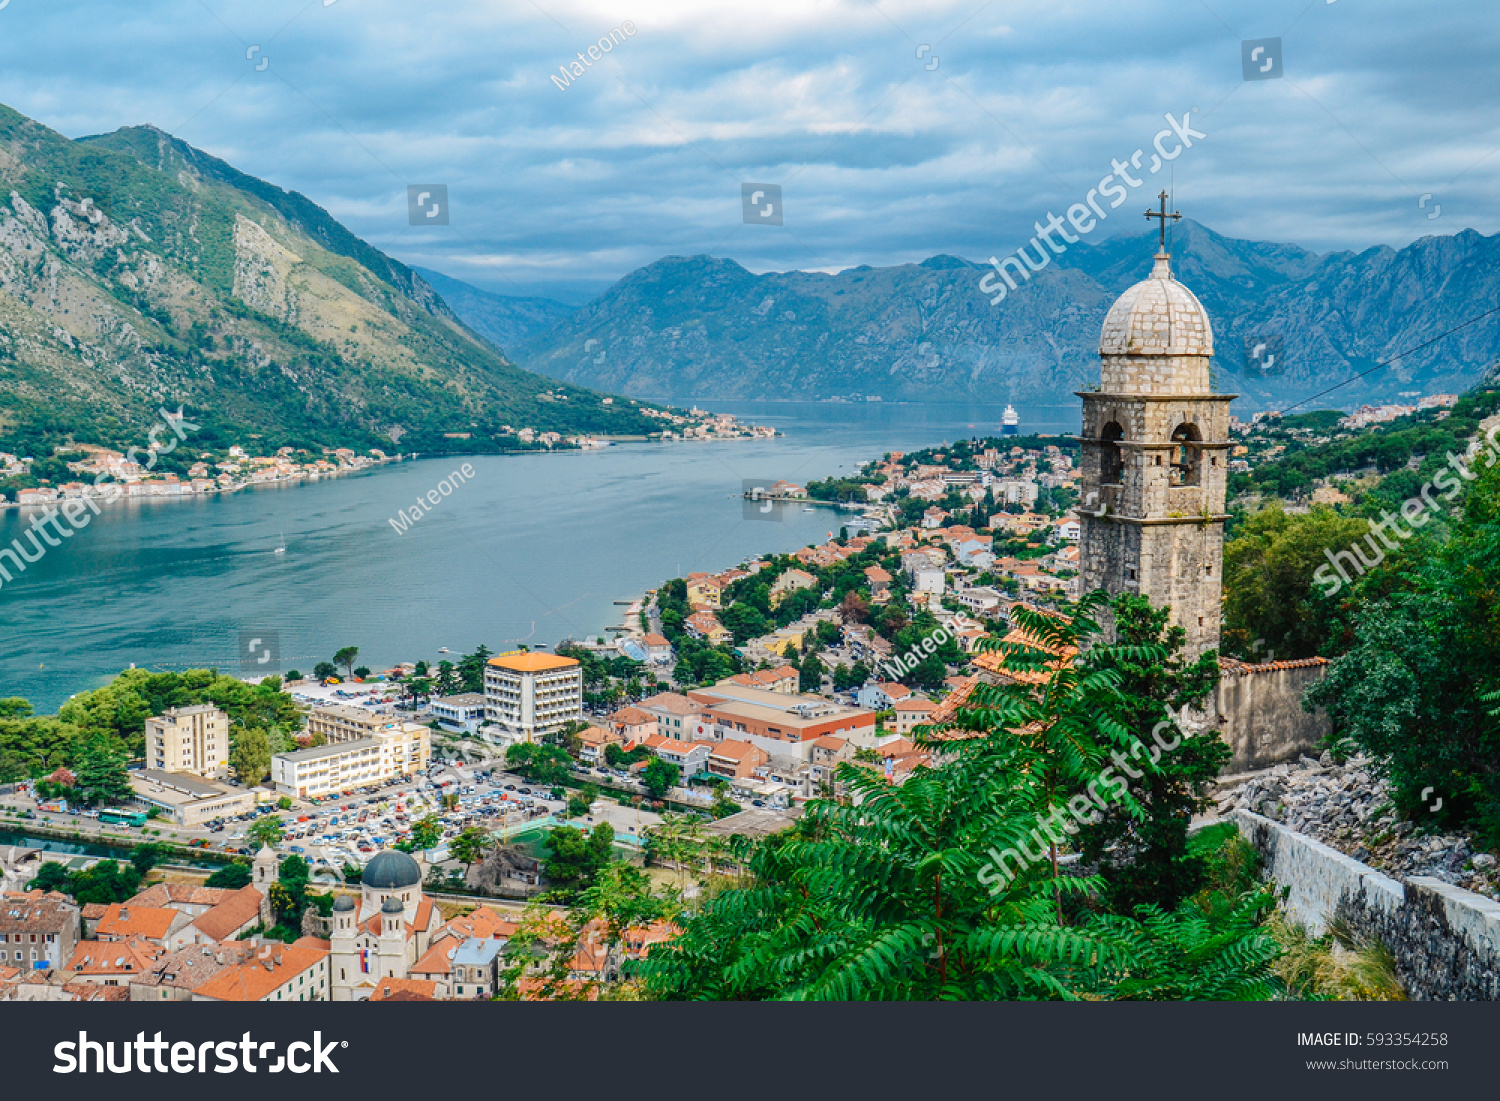 Panoramic view of town and mountains with church in foreground in Kotor, Montenegro #593354258